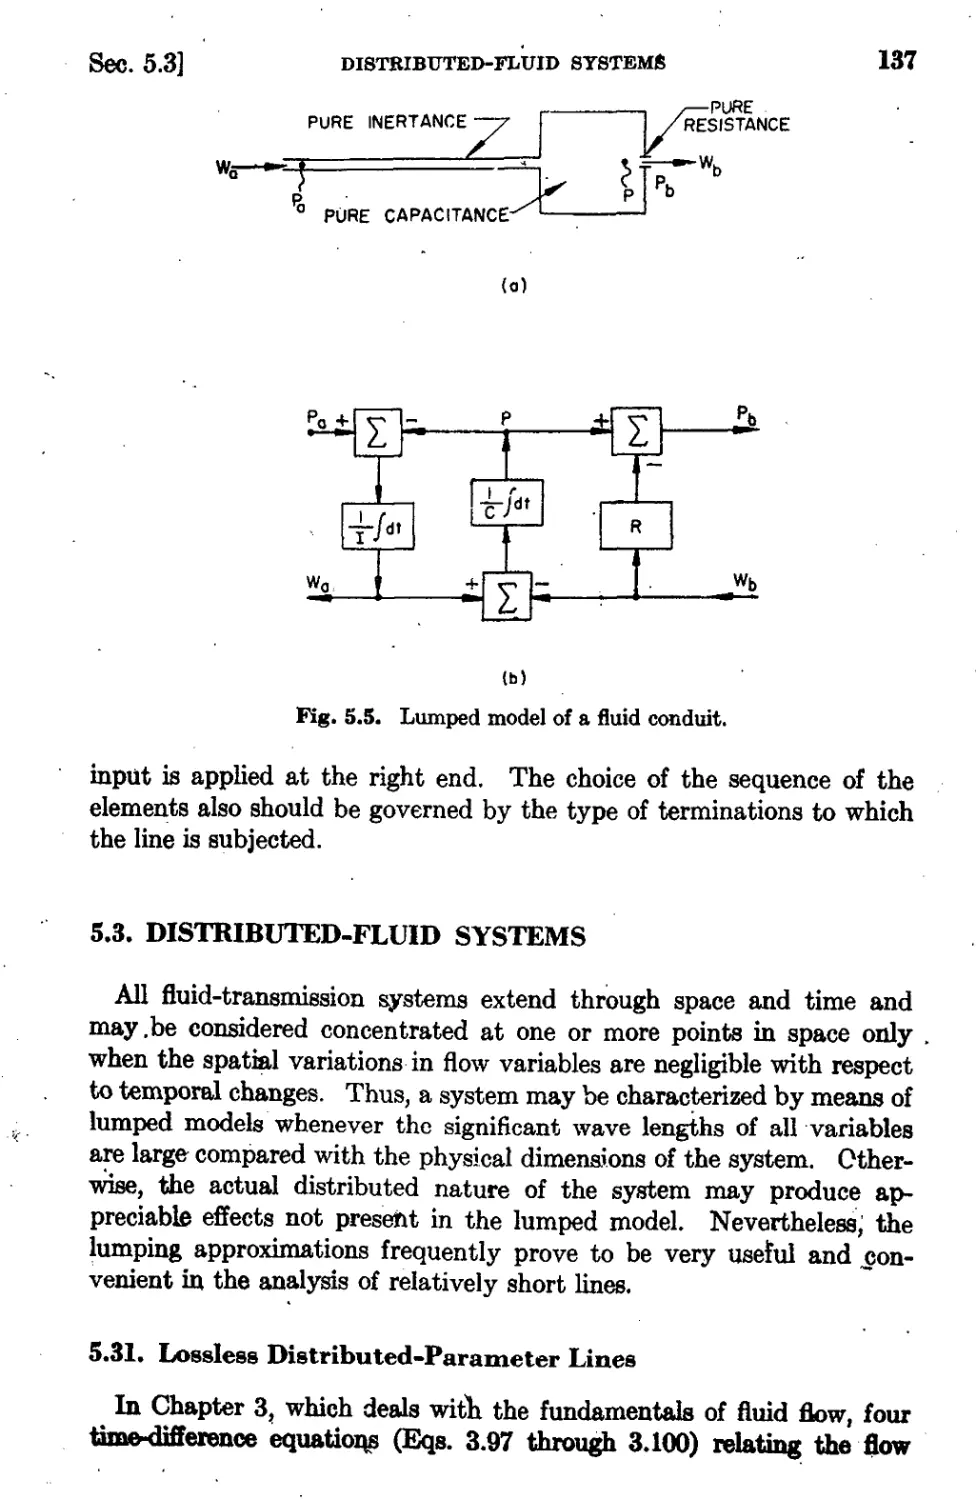 5.3 Distributed-Fluid Systems